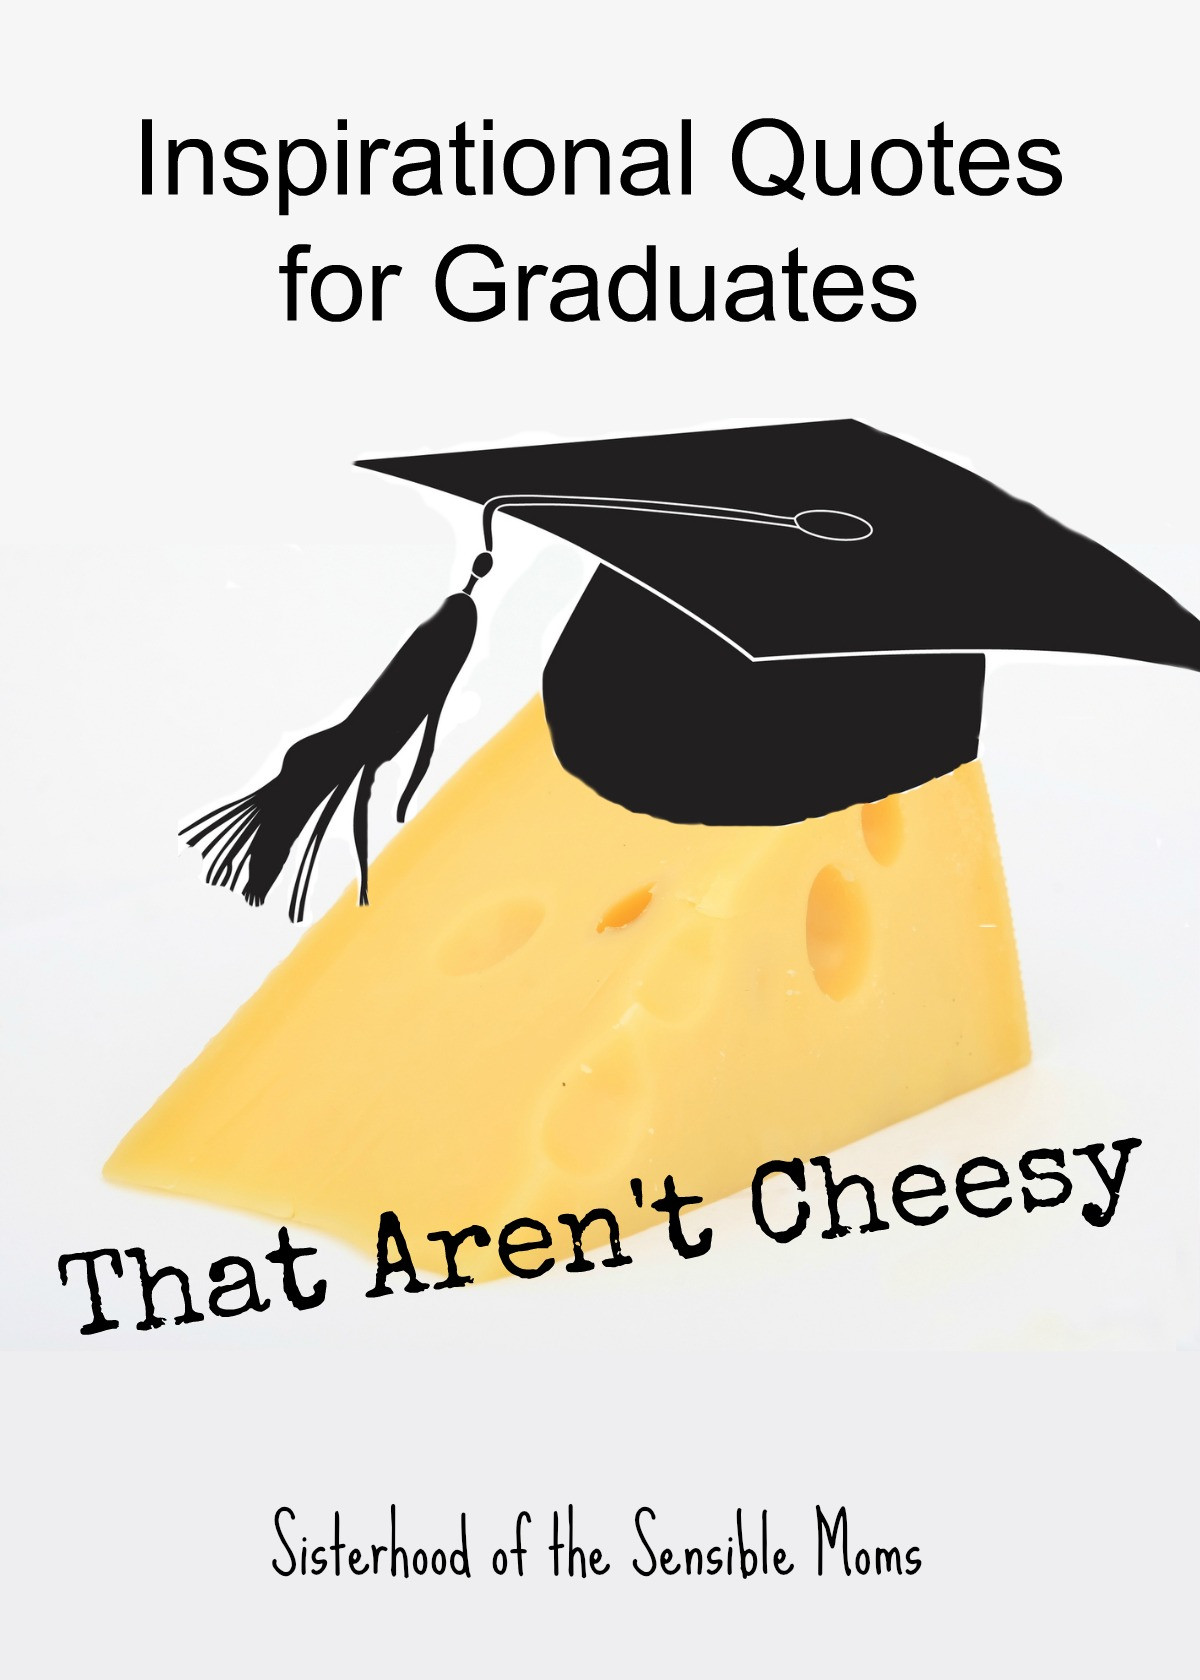 Graduation Wishes Quotes
 Inspirational Quotes for Graduates That Aren t Cheesy